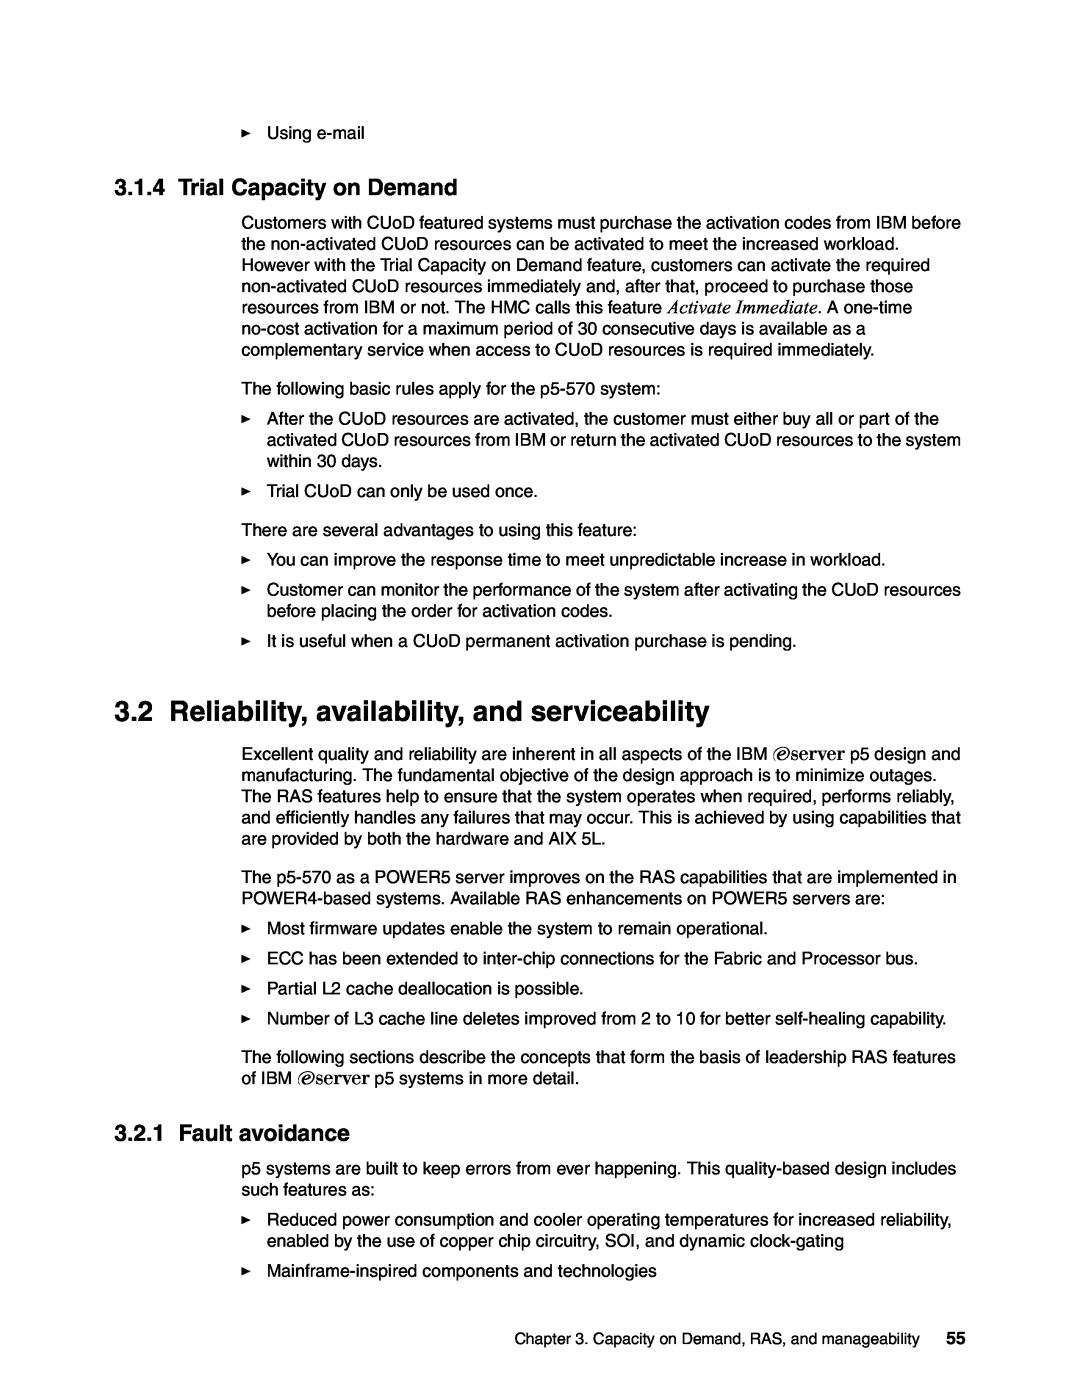 IBM P5 570 manual 3.2Reliability, availability, and serviceability, 3.1.4Trial Capacity on Demand, Fault avoidance 